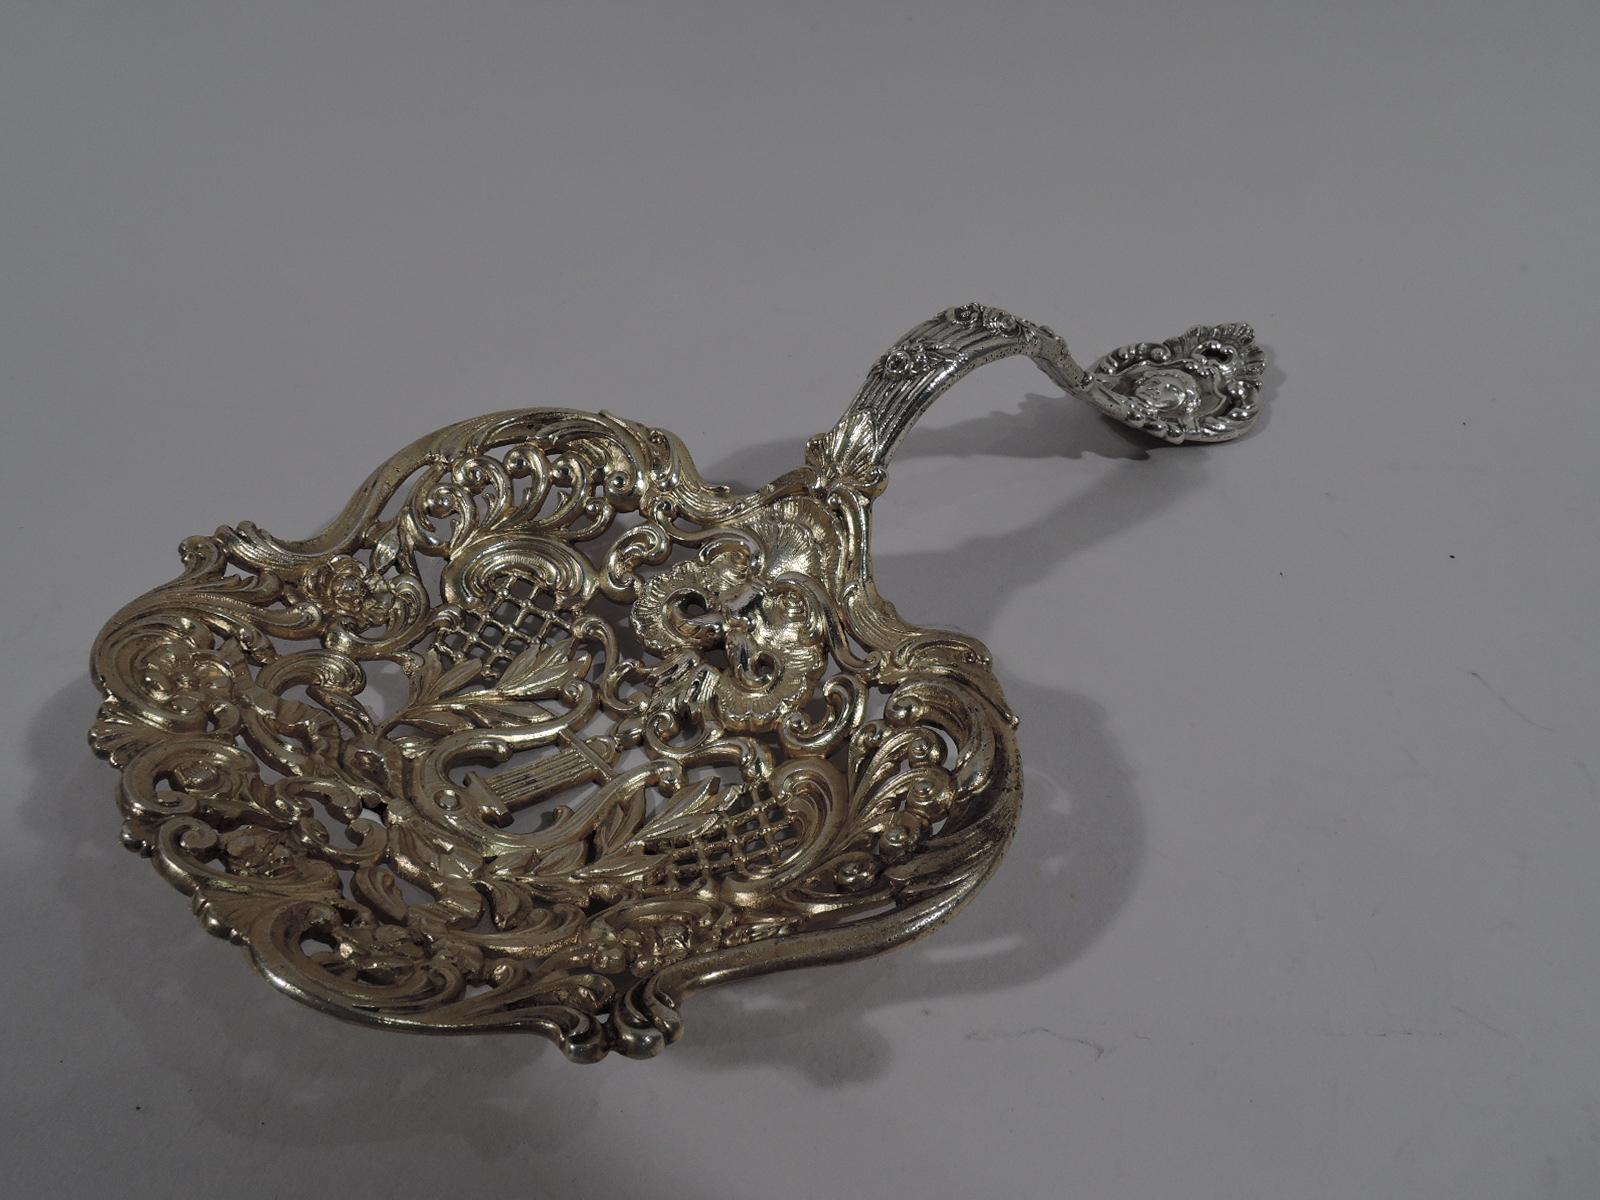 Turn-of-the-century Belle Époque sterling silver bonbon scoop. Made by Gorham in Providence. Shaped and gilt bowl with pierced scrolls, flowers, diaper, and central lyre. S-scroll and reeded handle. Leafy terminal inset with Classical mask. Fully